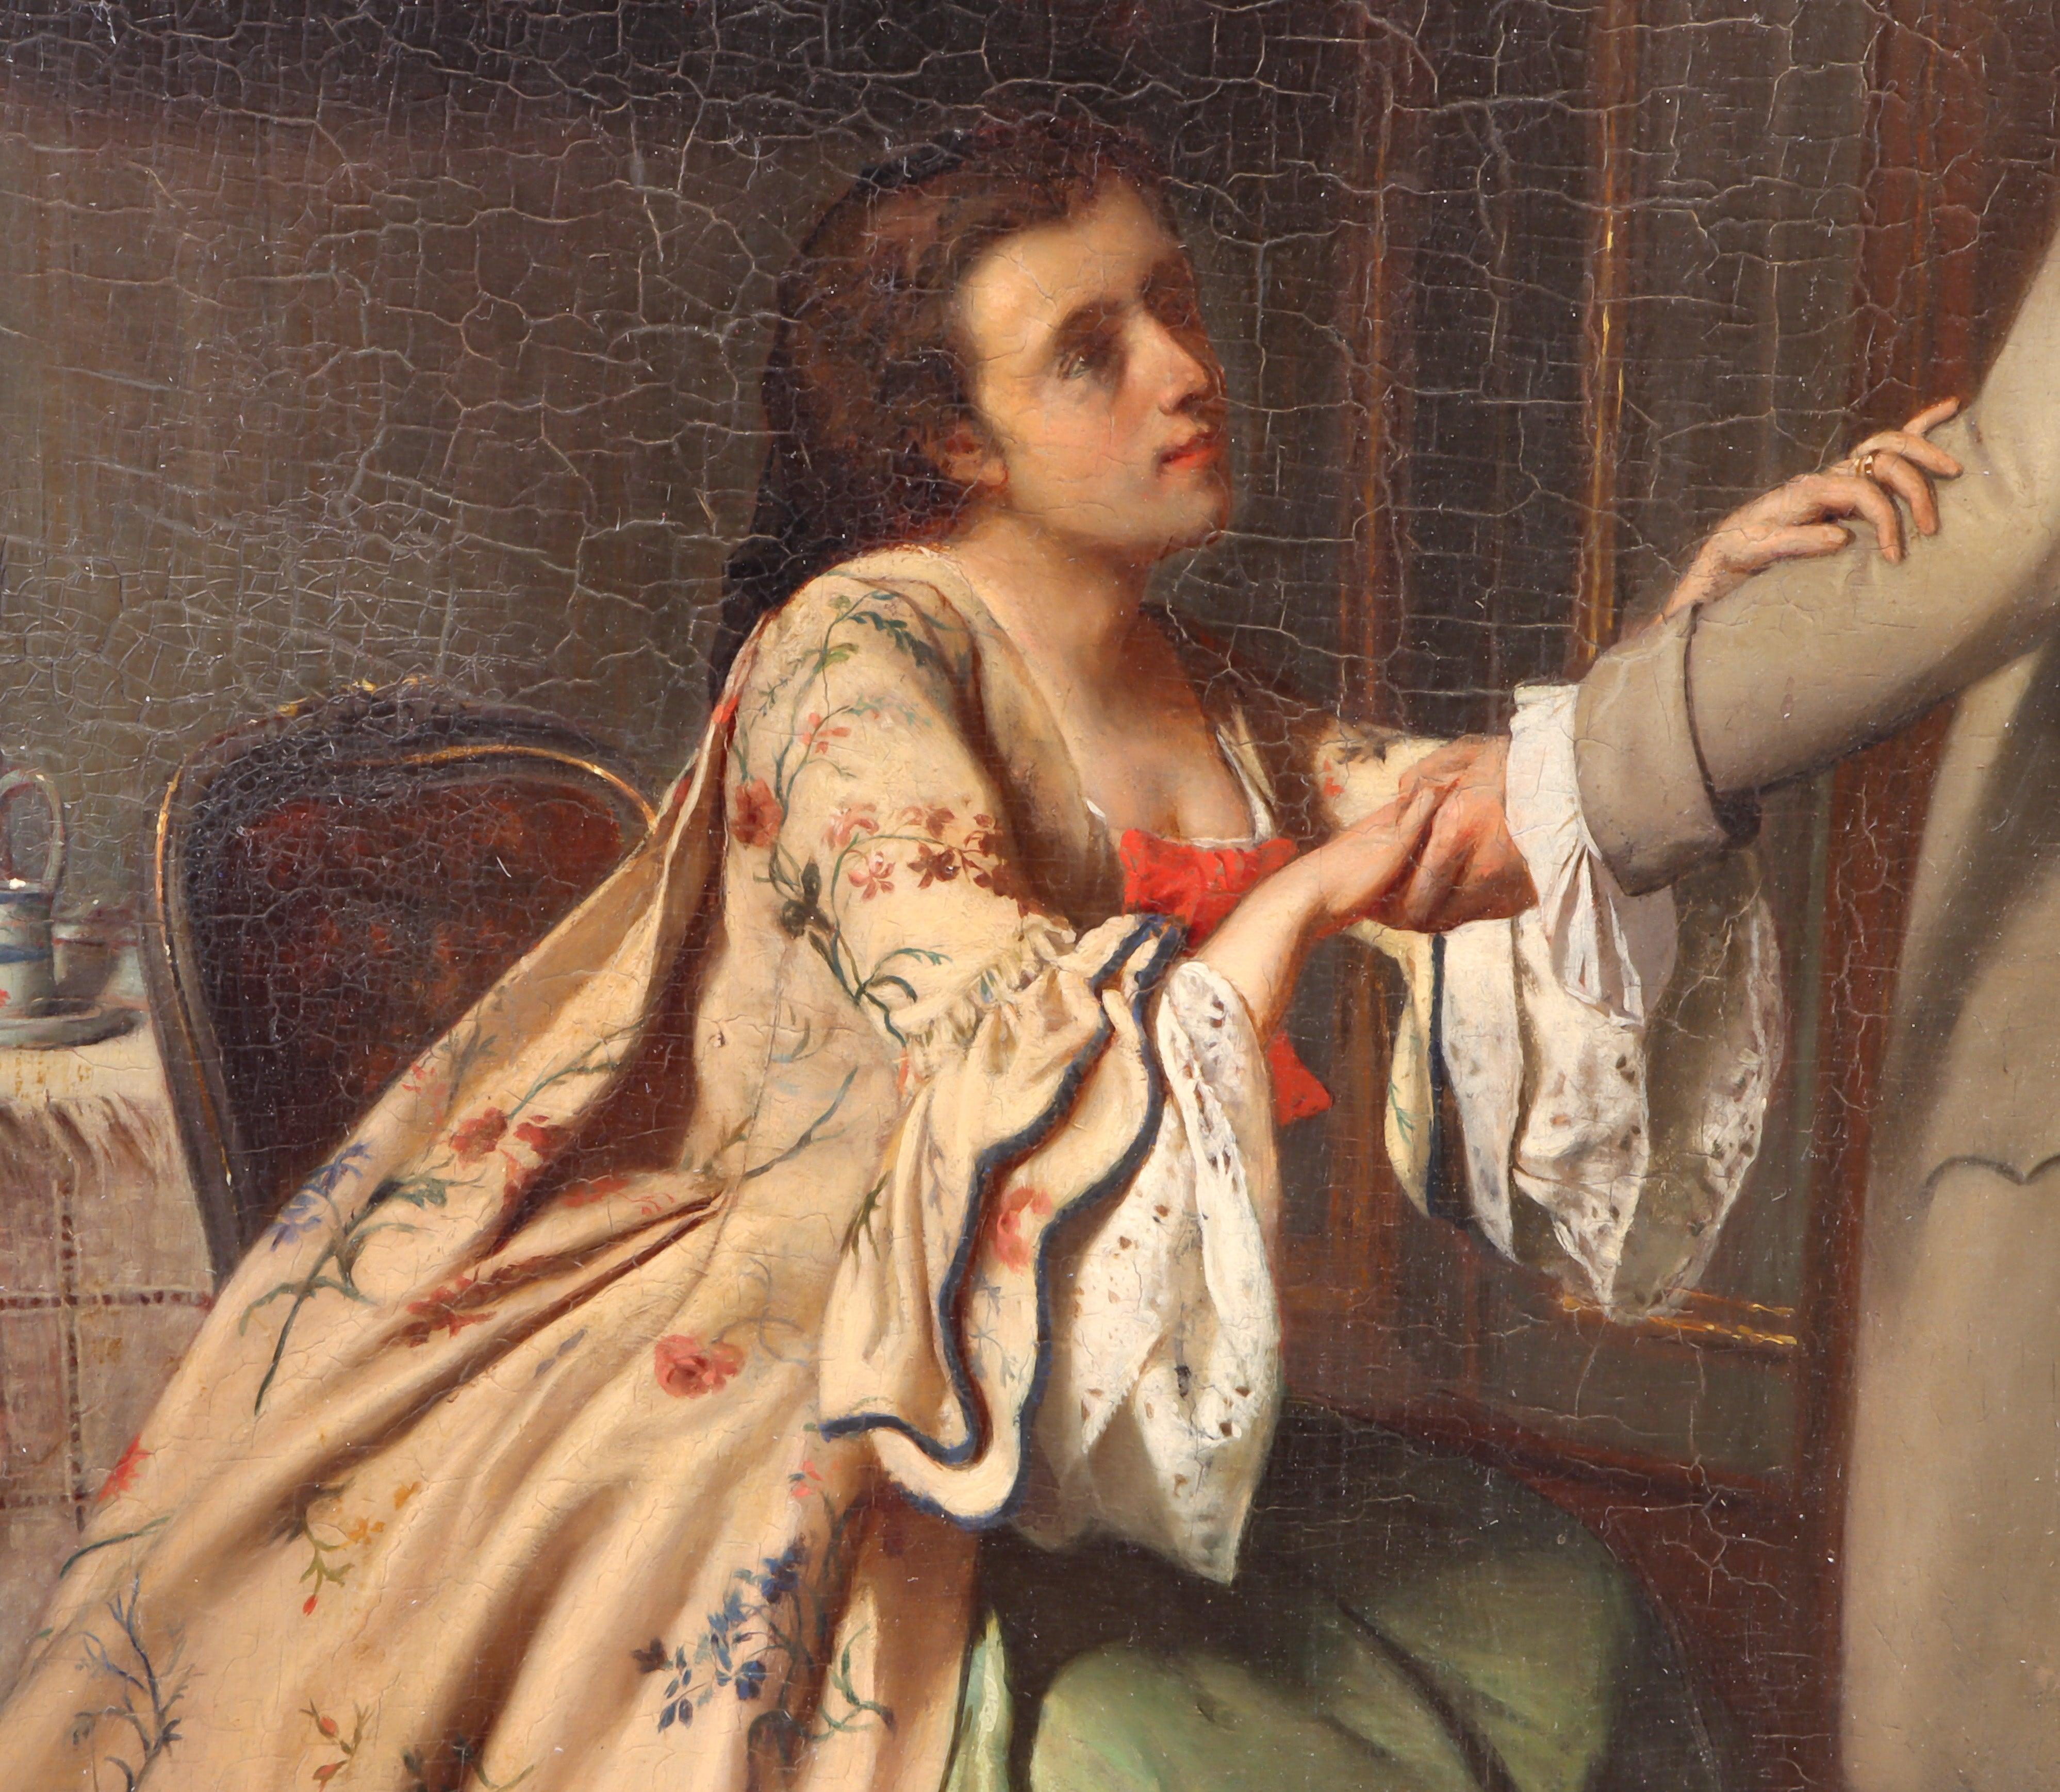 Oiled Genre Painting, Parting Lovers French, 19th Century Oil on Canvas